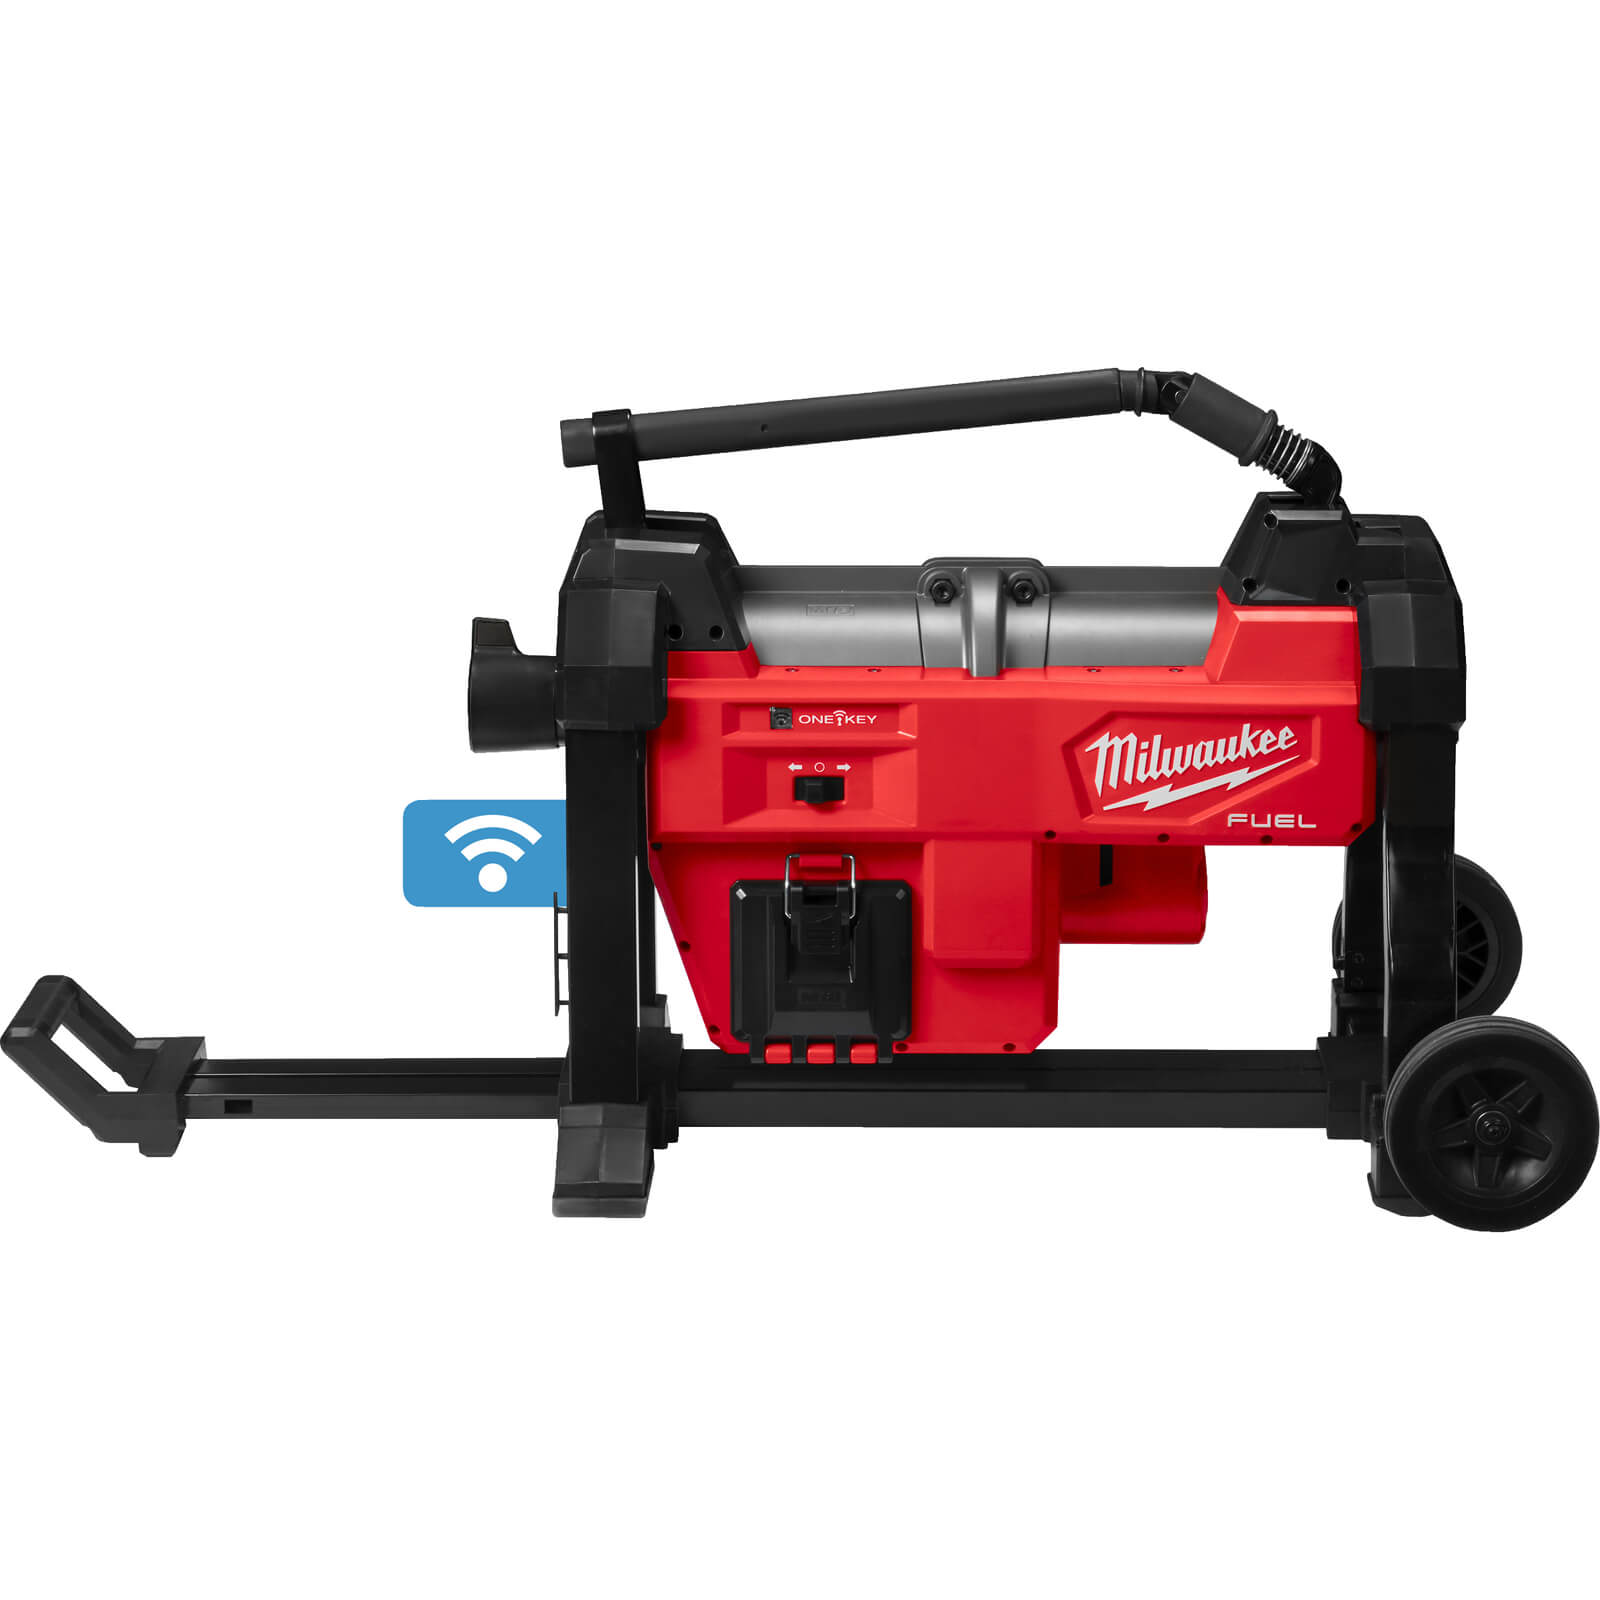 Image of Milwaukee M18 FSSM Fuel 18v Cordless Brushless Sectional Sewer Machine No Batteries No Charger No Case